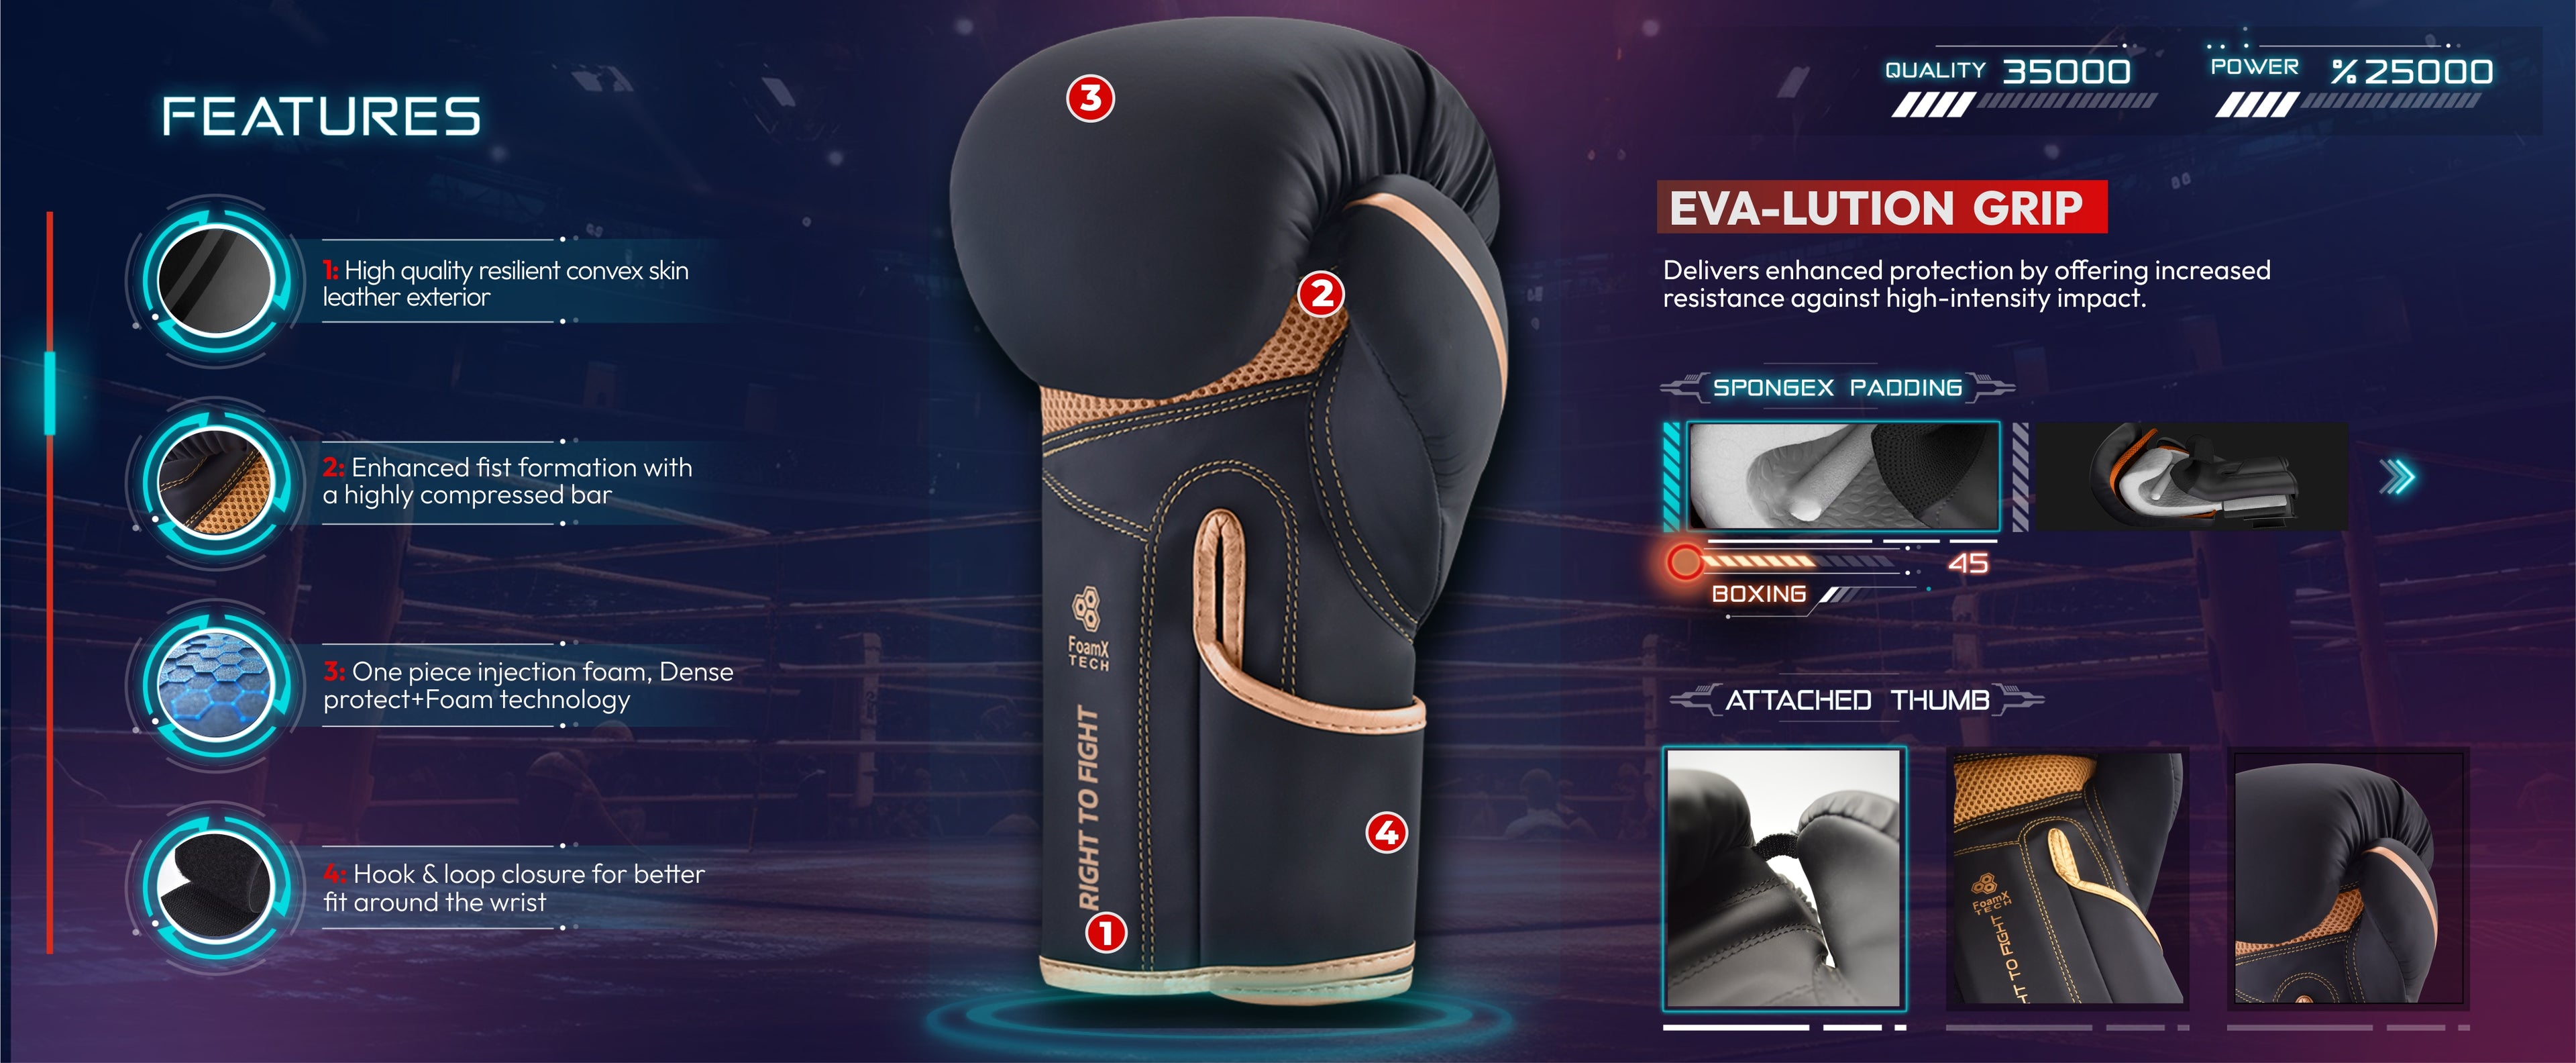 Unleash your potential with R2F Boxing Gloves - crafted for pro training and sparring. Vegan leather, multi-layered design for Muay Thai, MMA, and kickboxing. Ideal for men and women, available in 10oz to 16oz. Elevate your workout with heavy punching bag mitts and focus pads.